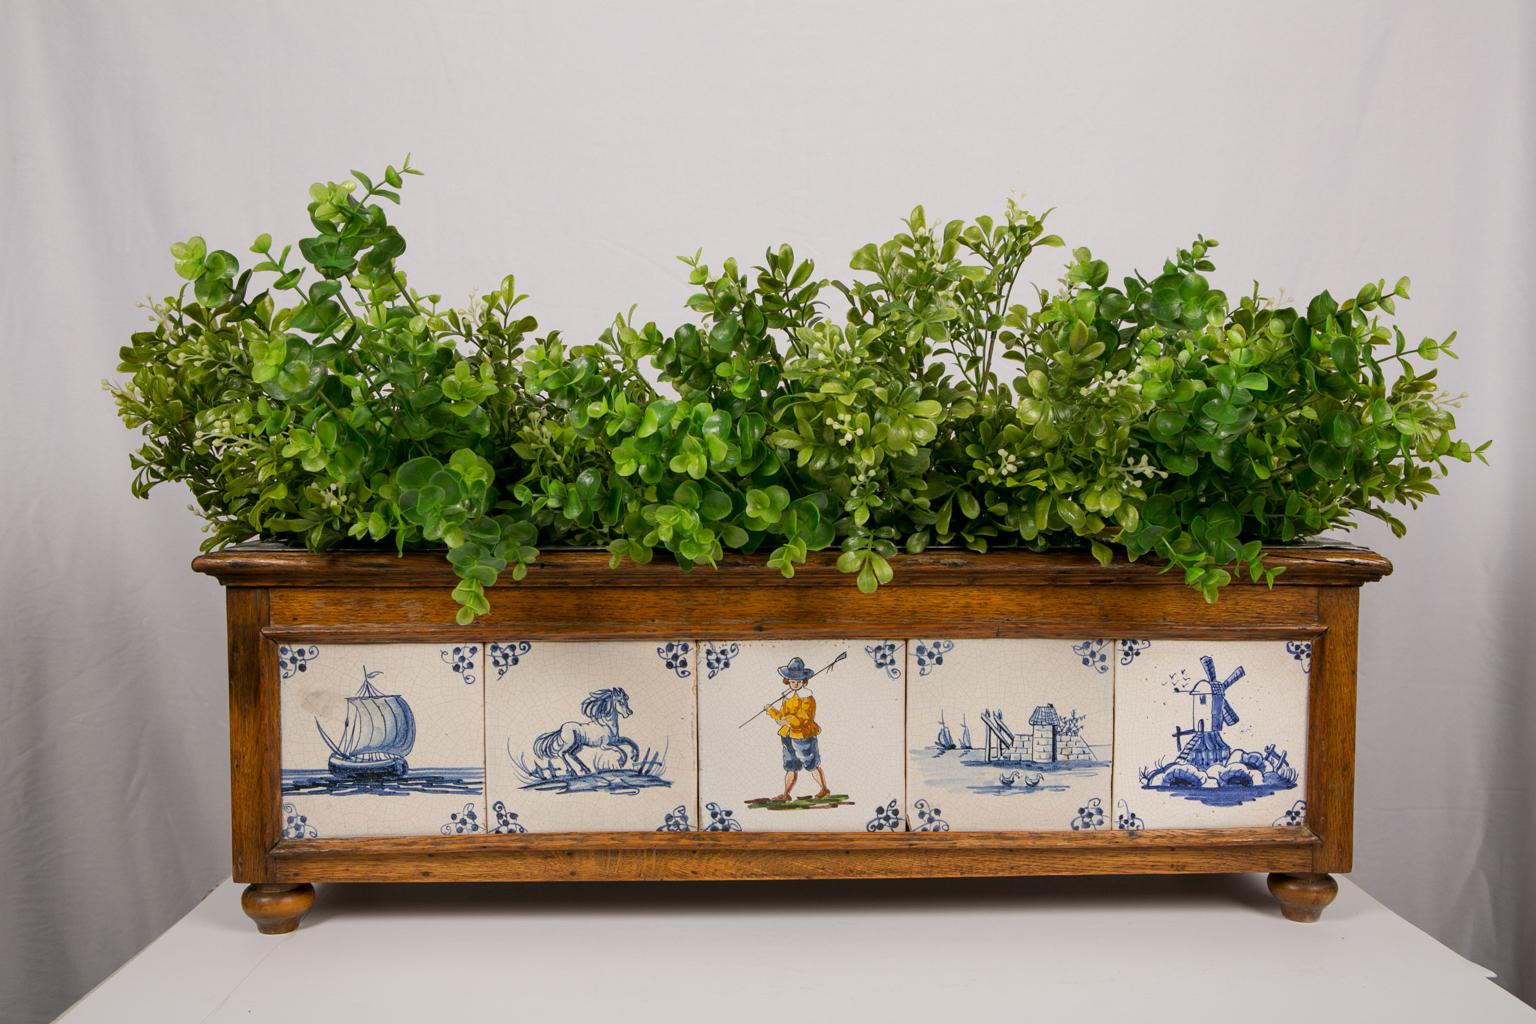 18th century Dutch delft tiles set in a modern planter. The wood planter is fitted with a tin liner and decorated with eight Dutch delft tiles.
The blue and white delft tiles show a galloping horse, a waterside scene, a sailing ship, a horse and